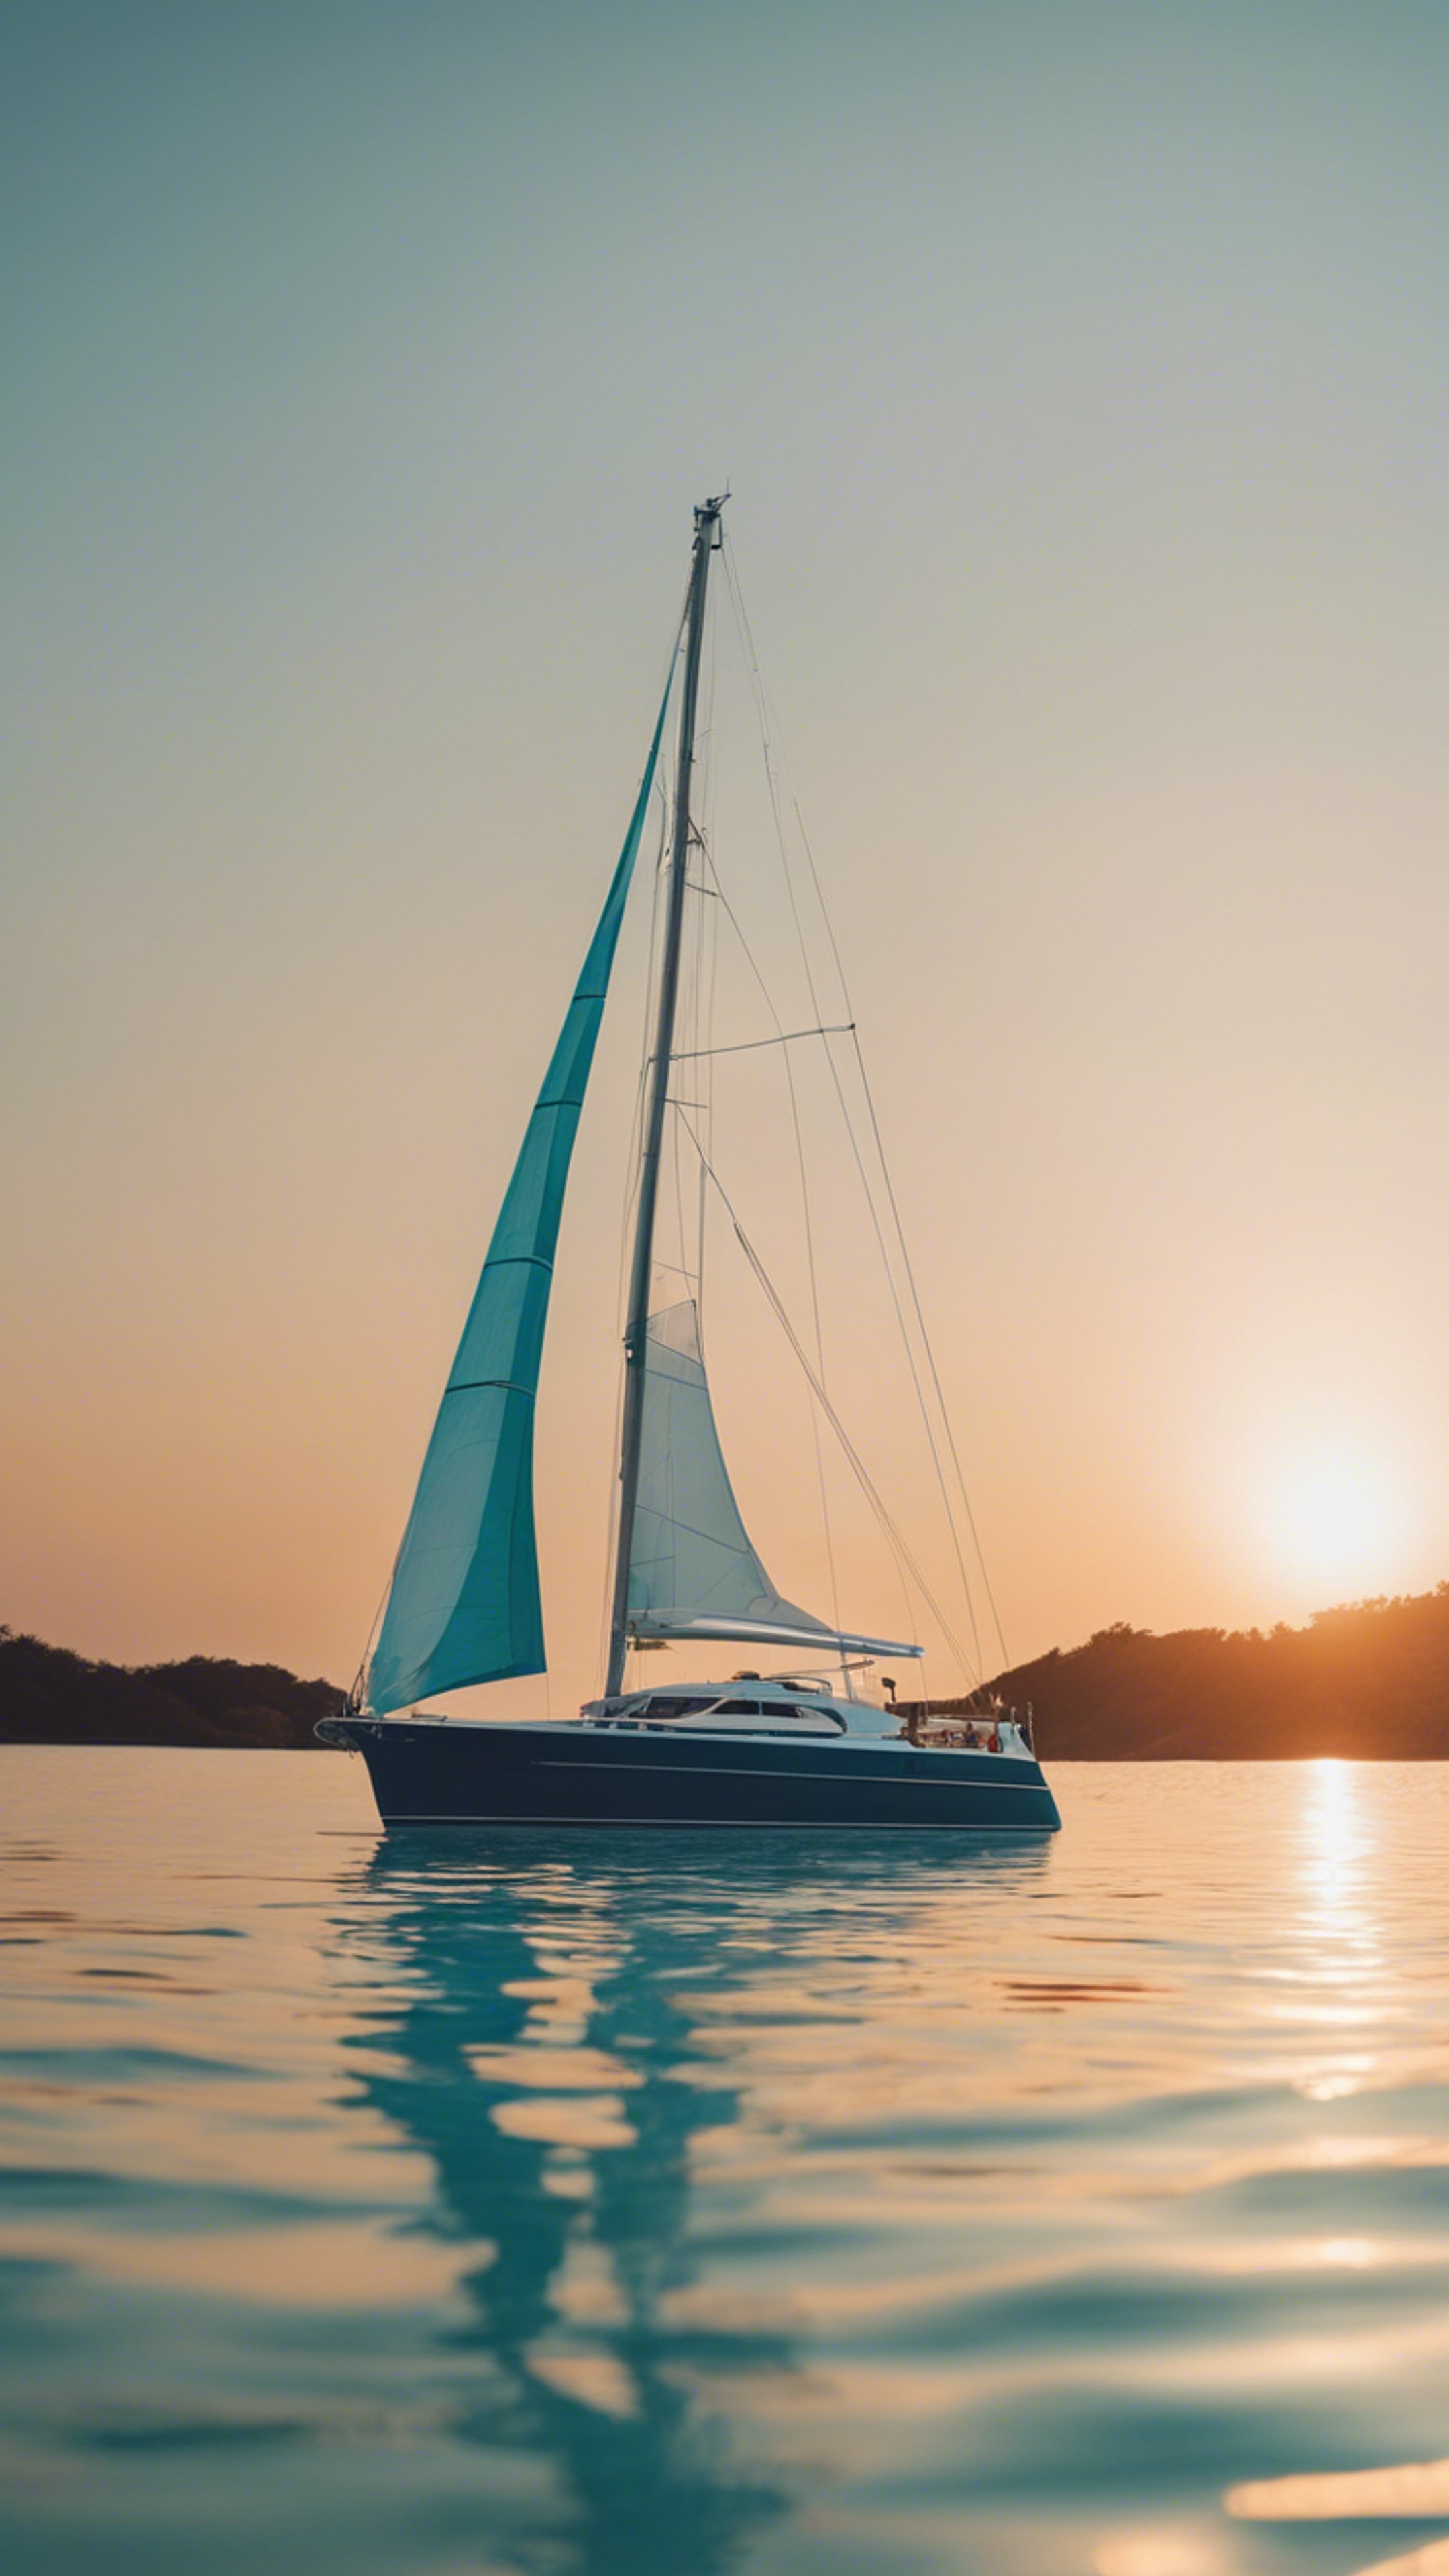 A preppy blue yacht sailing calmly on clear aquamarine waters at sunset. Papel de parede[1bfcce9f38c64176b950]